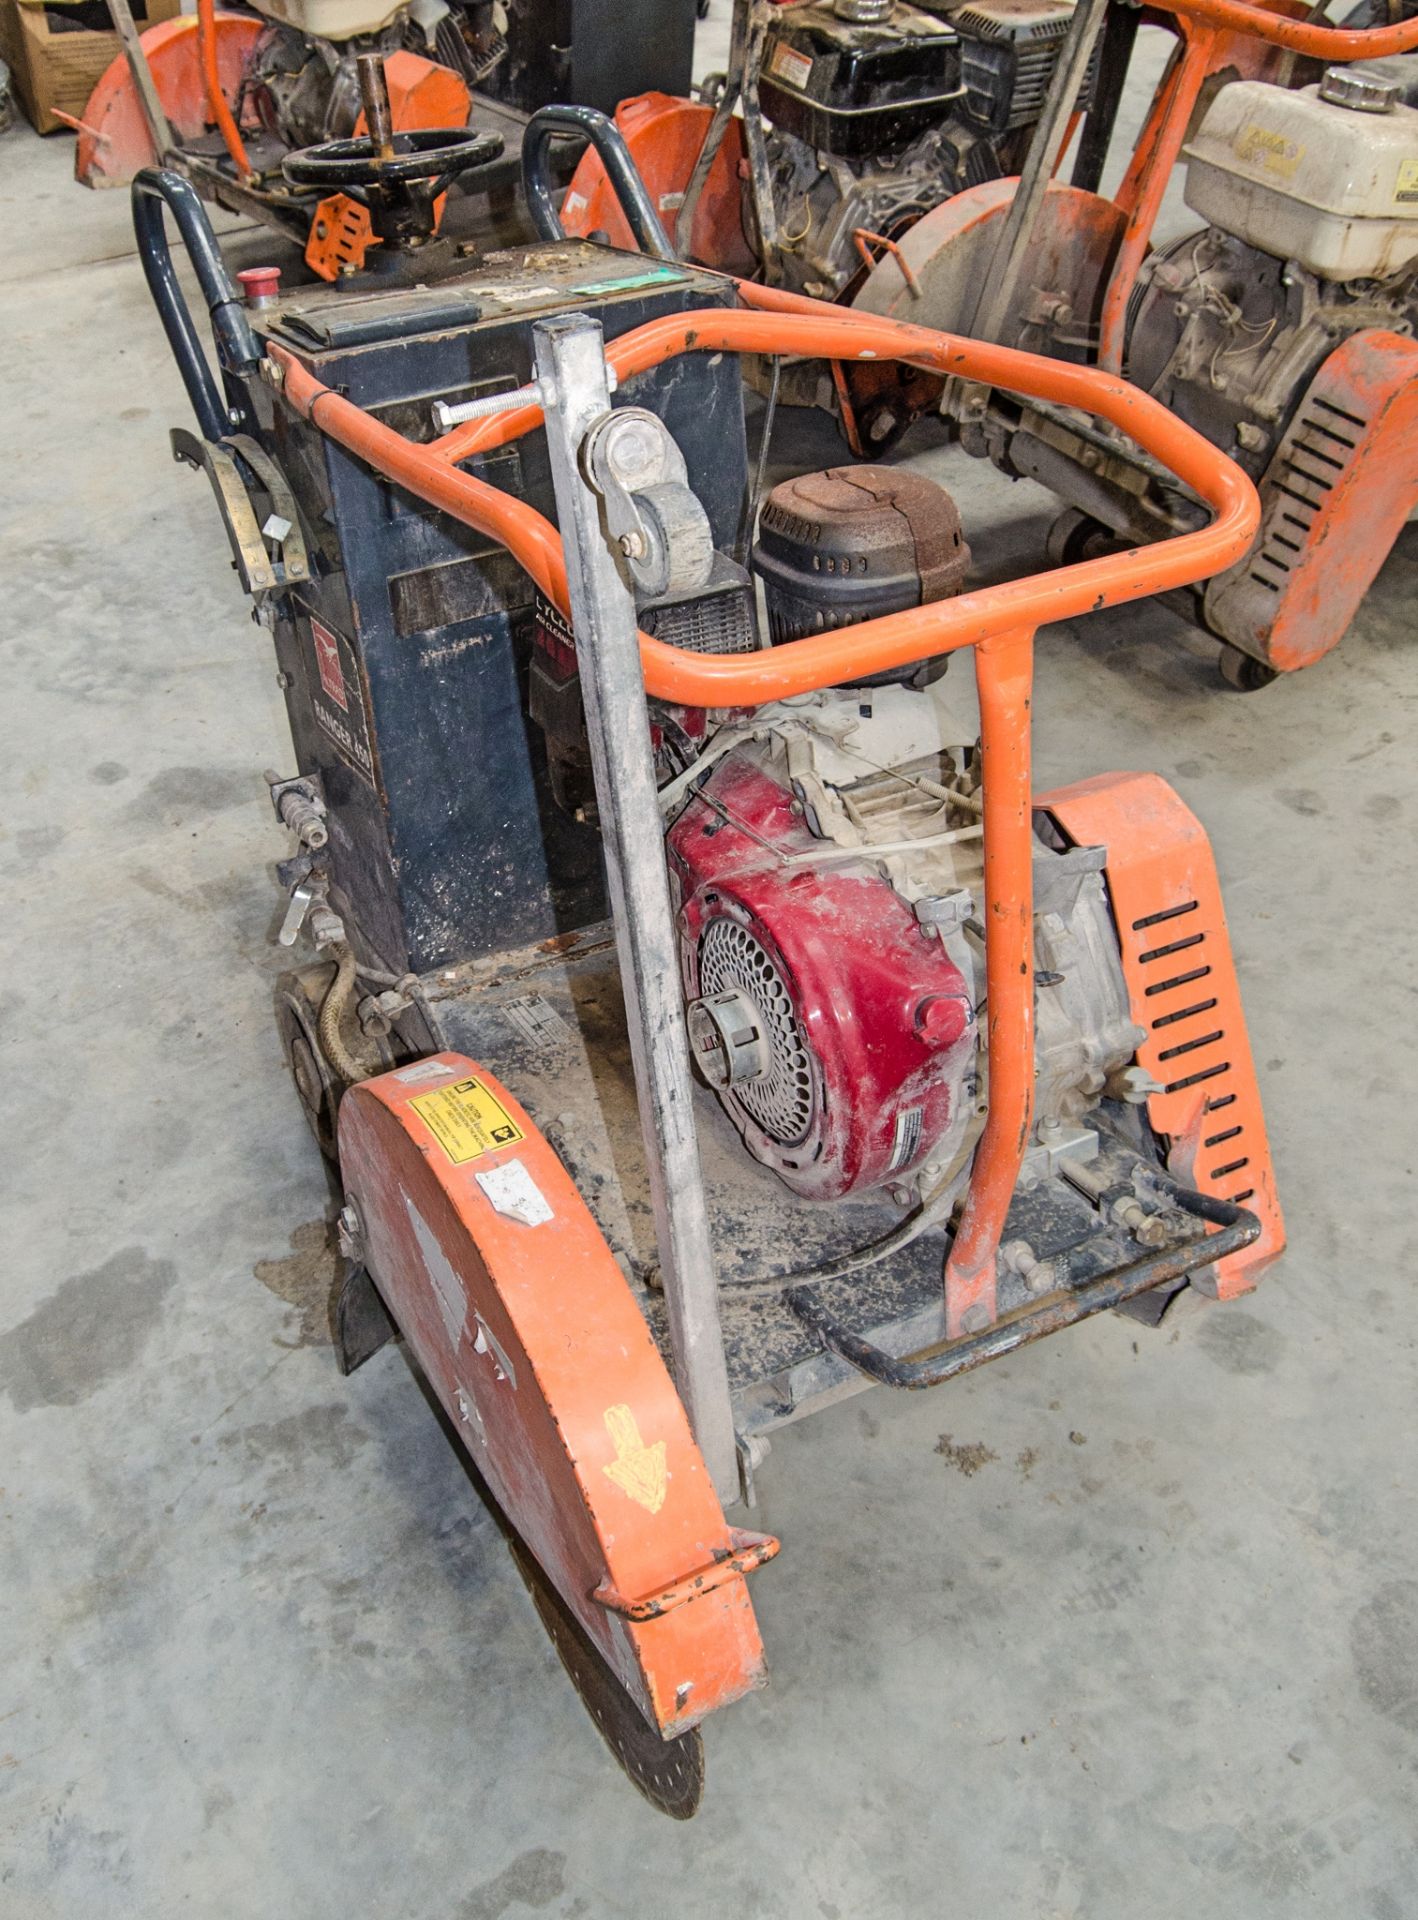 Altrad Ranger 450 petrol driven road saw ** Pull cord assembly and petrol tank missing ** 18065530